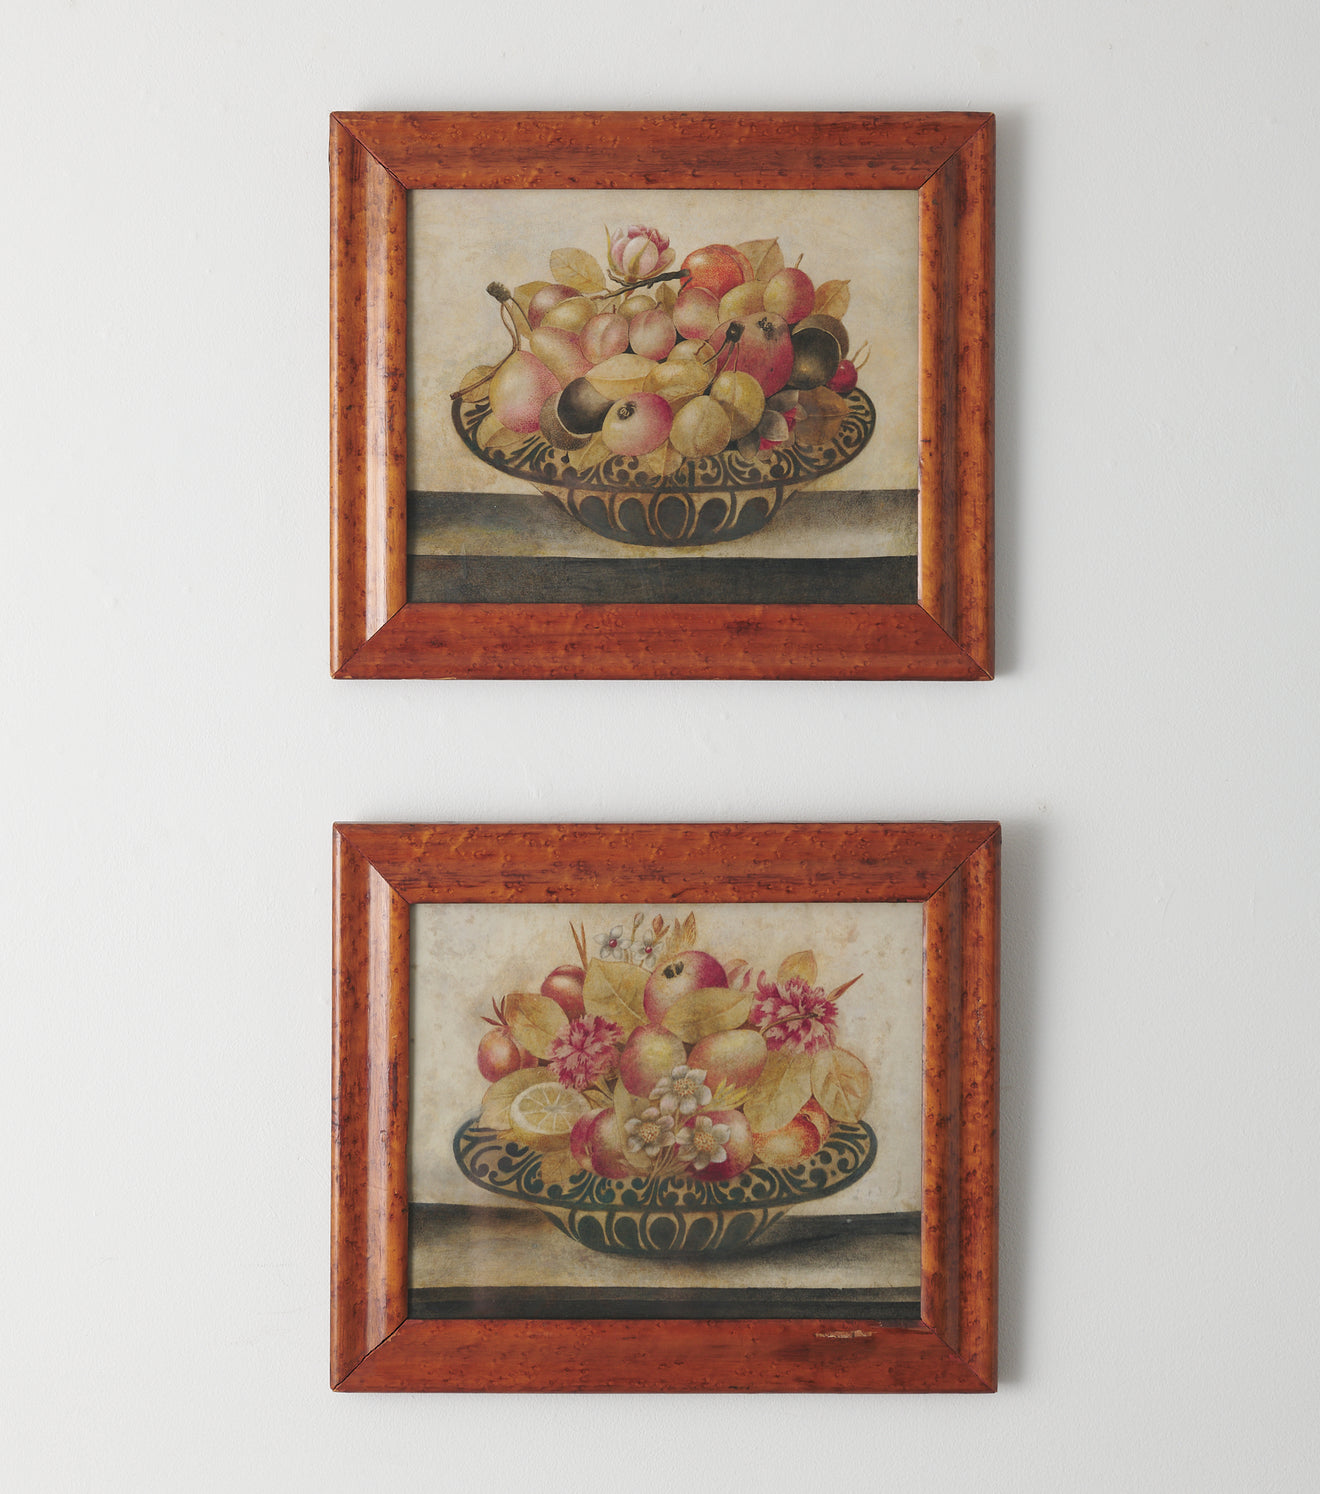 PAIR OF WATERCOLOR PAINTINGS ON VELLUM POSSIBLY OCTAVIANUS MONTFORT OR GIOVANNI GARZINI